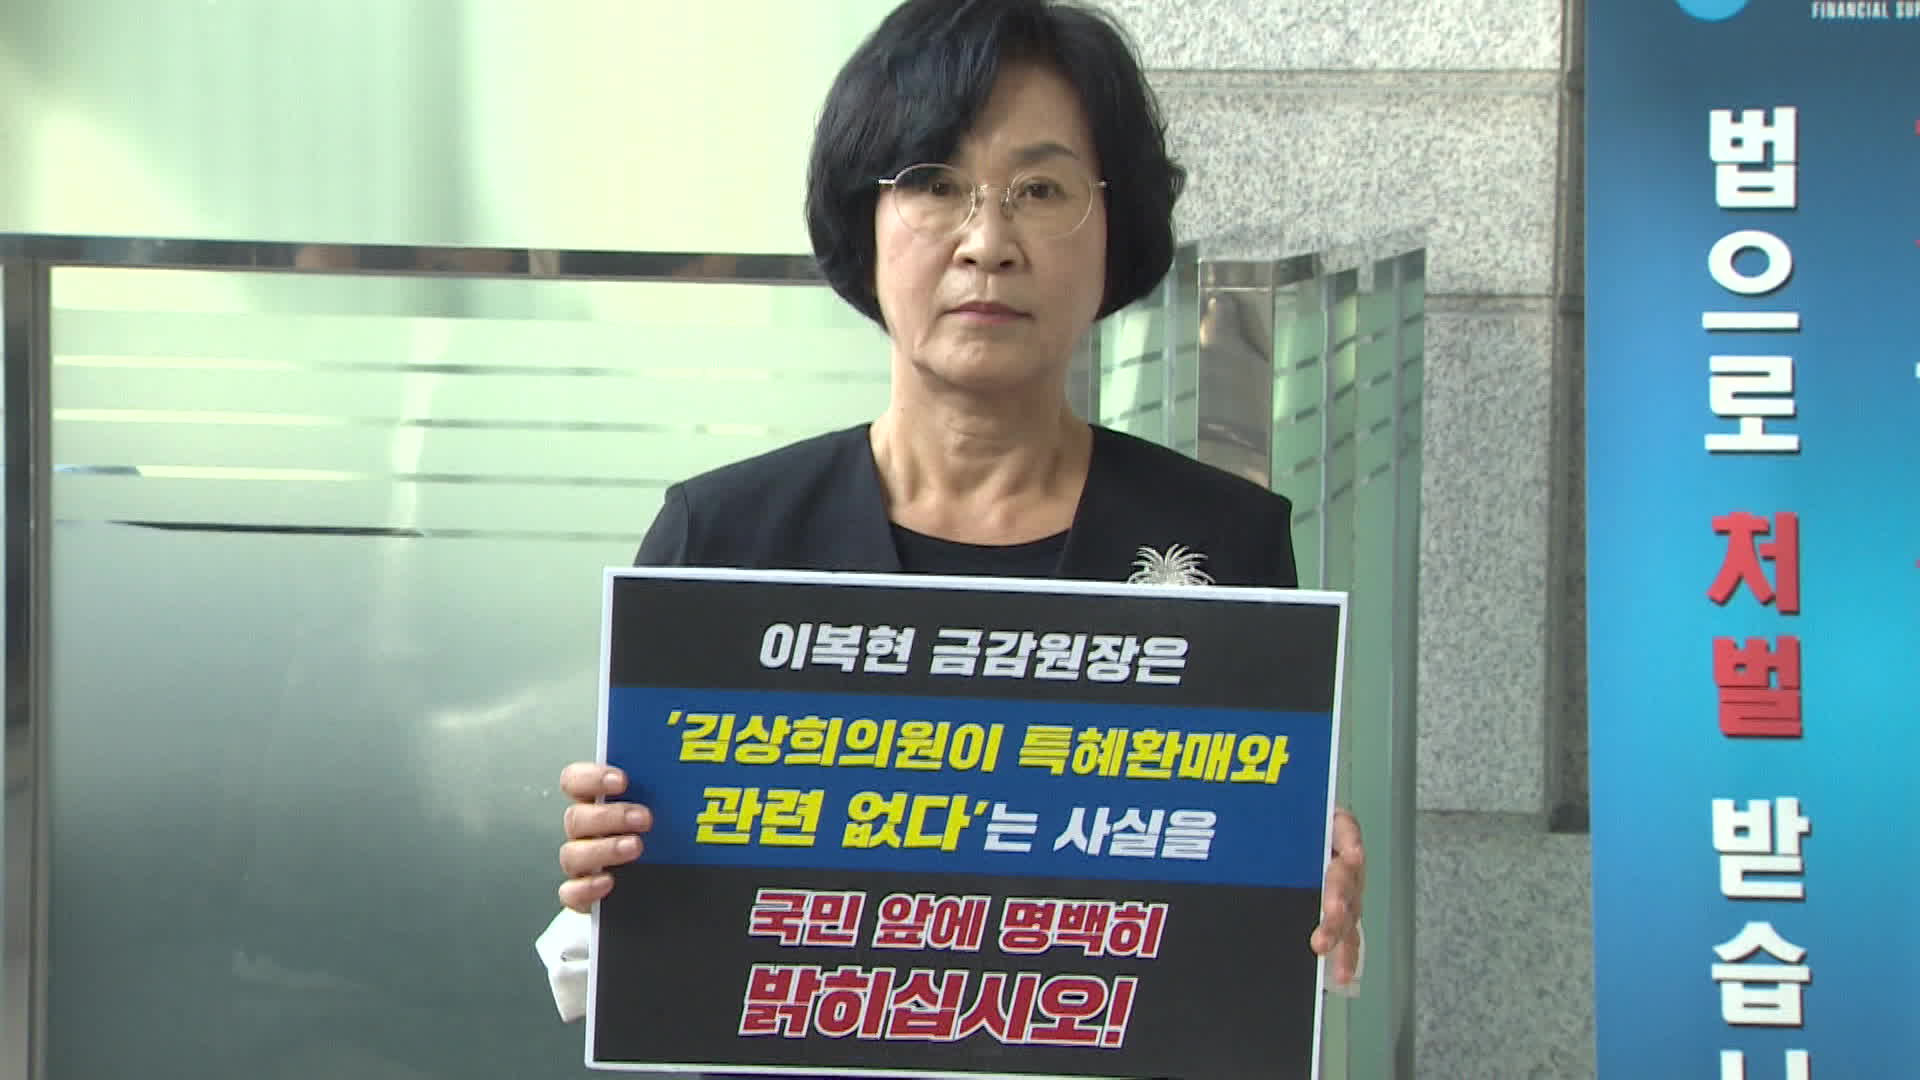 Rep. Kim Sang-hee visits the Financial Supervisory Service on August 25 and protests.